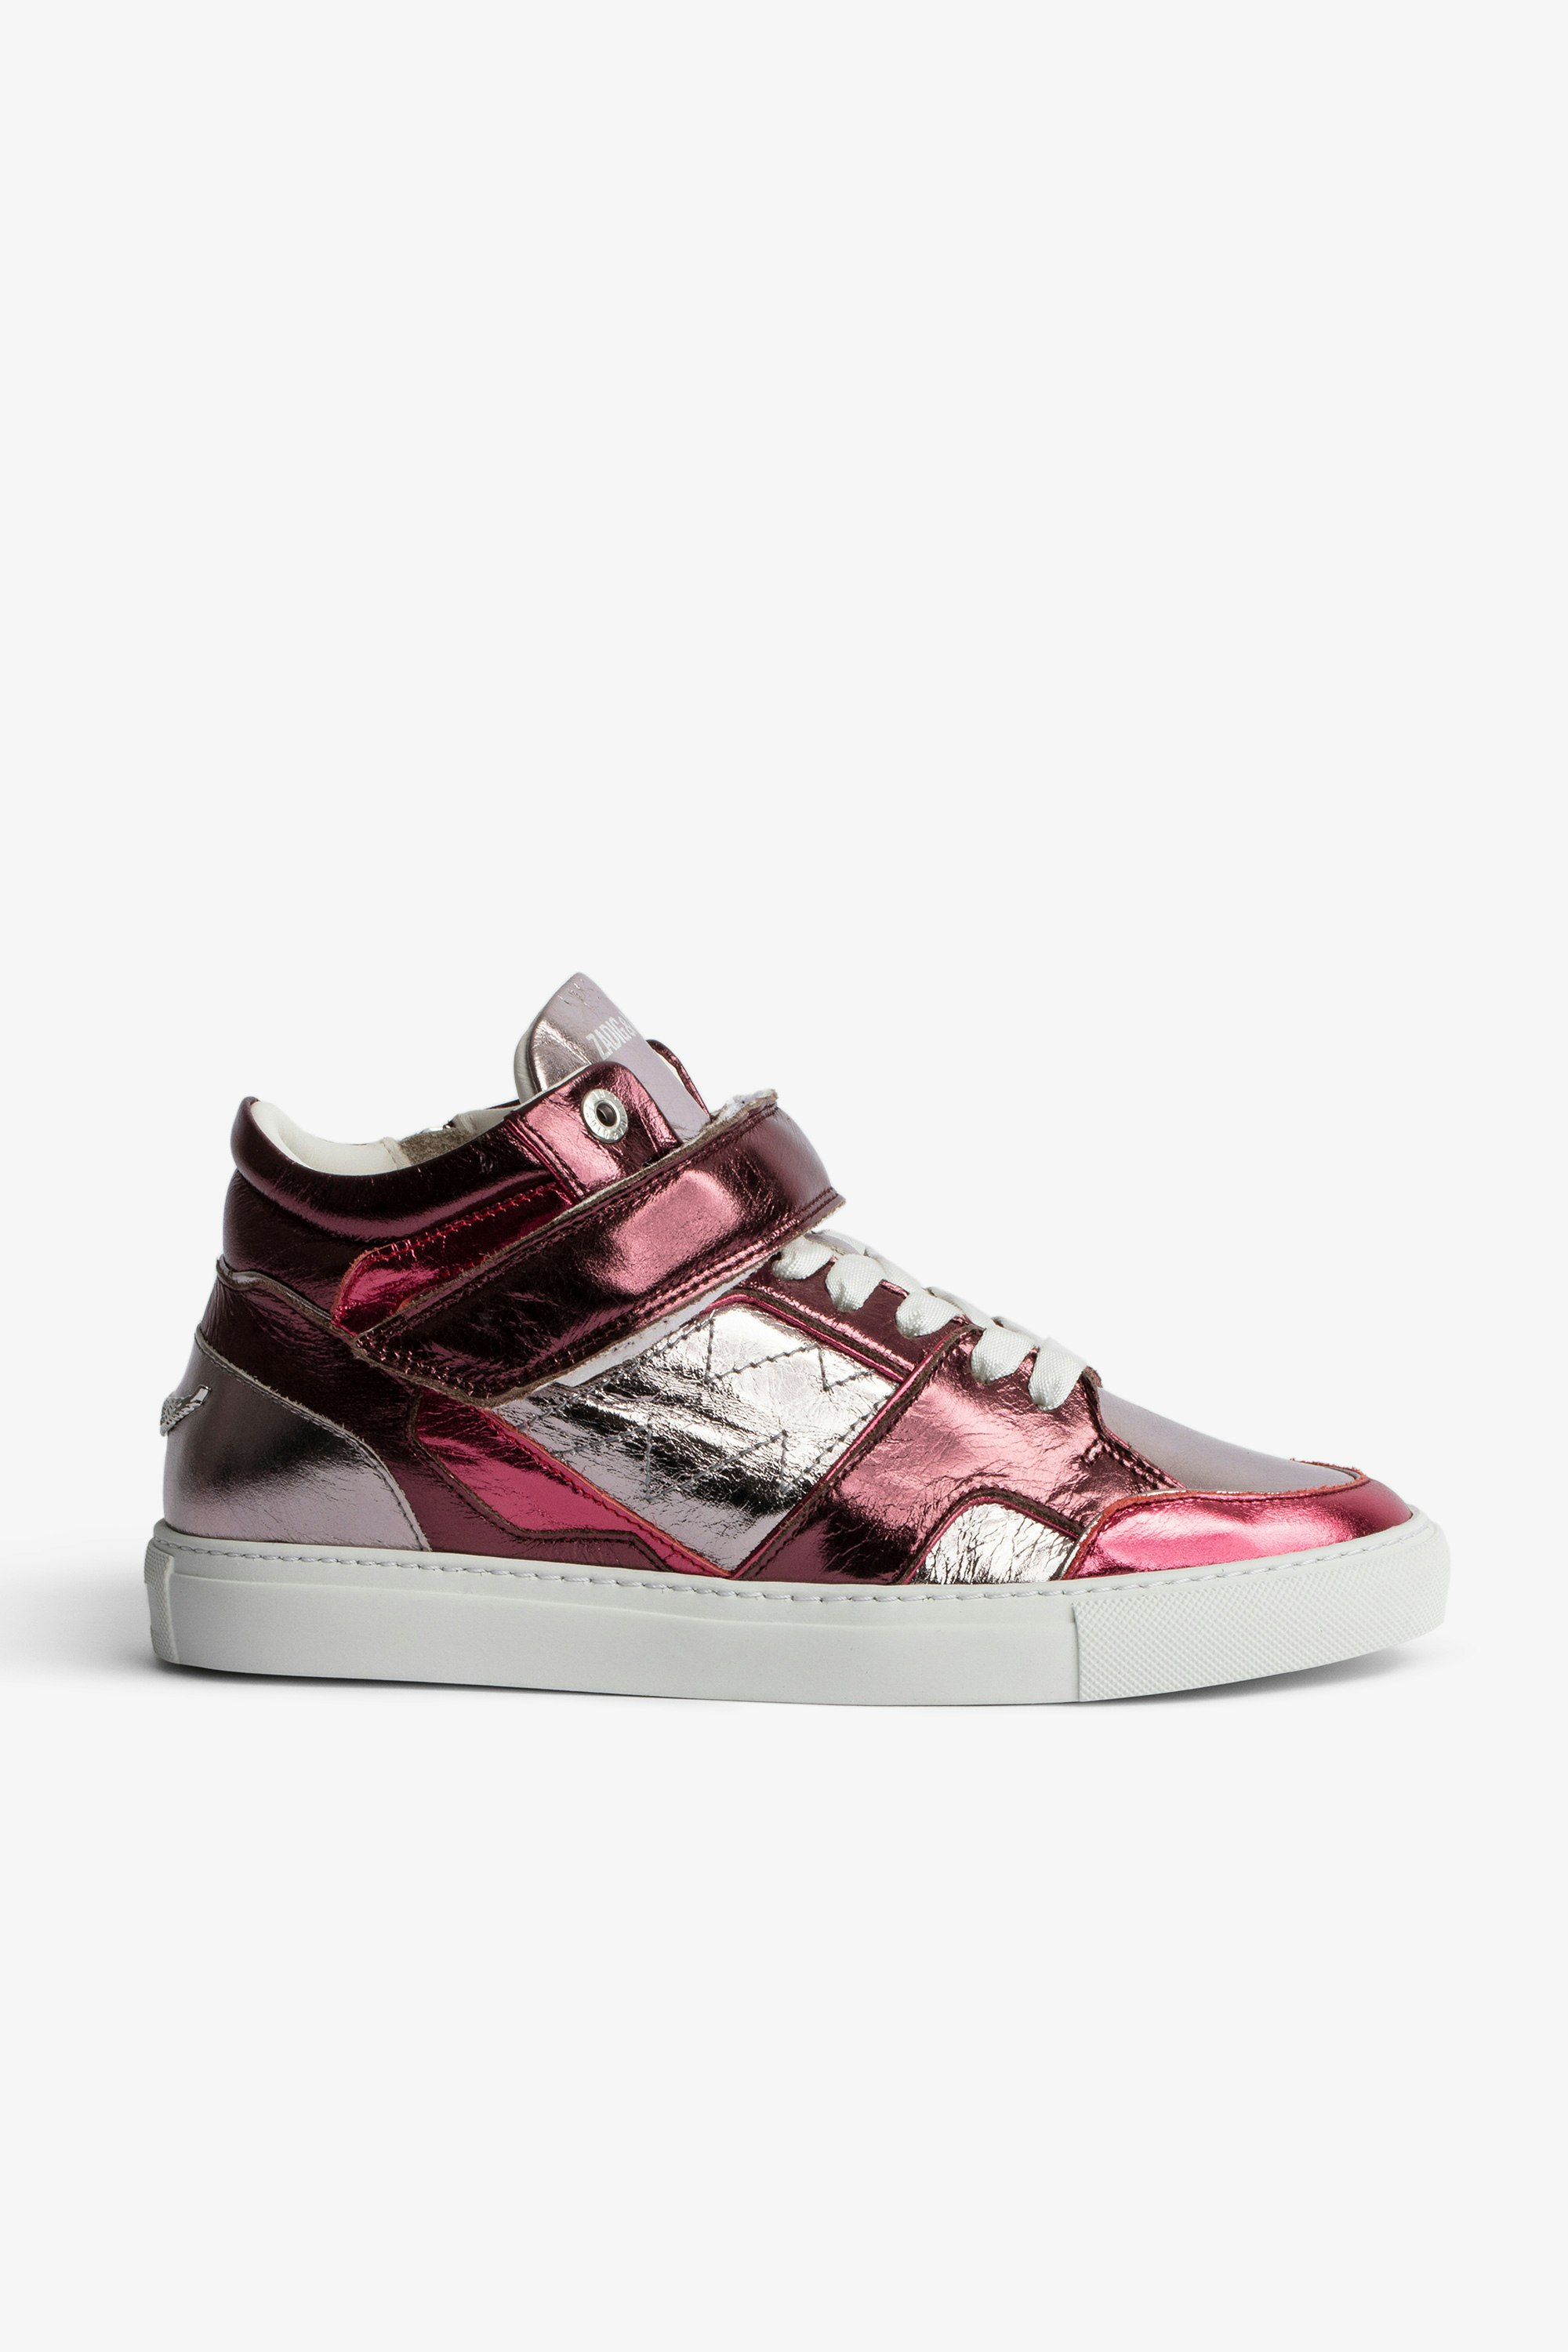 ZV1747 Mid Flash ビンテージ metal mix スニーカー Women’s mid-top sneakers in silver and red metallic leather